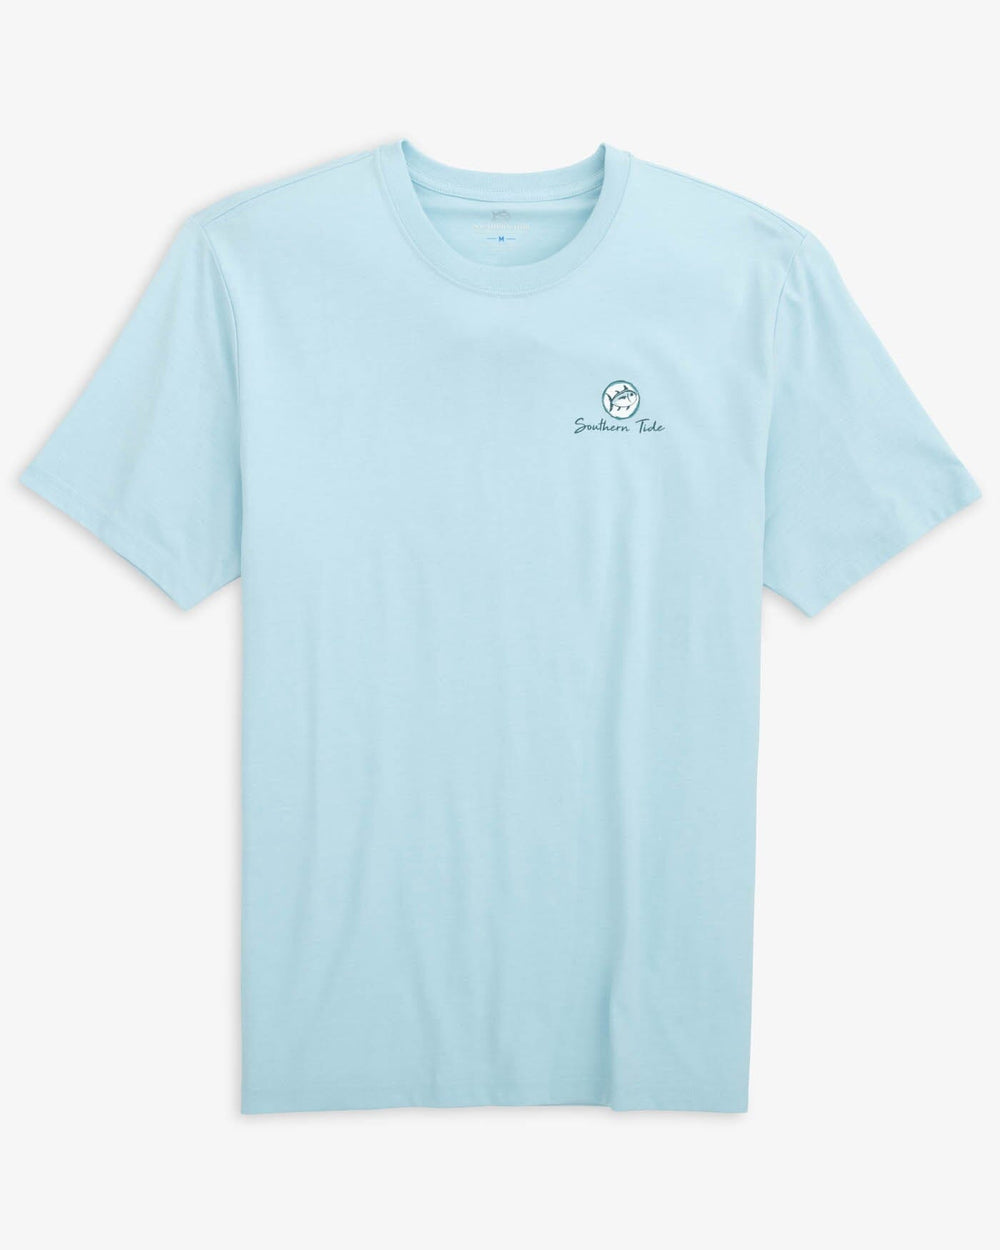 The front view of the Southern Tide Talk Birdie To Me T-Shirt by Southern Tide - Dream Blue